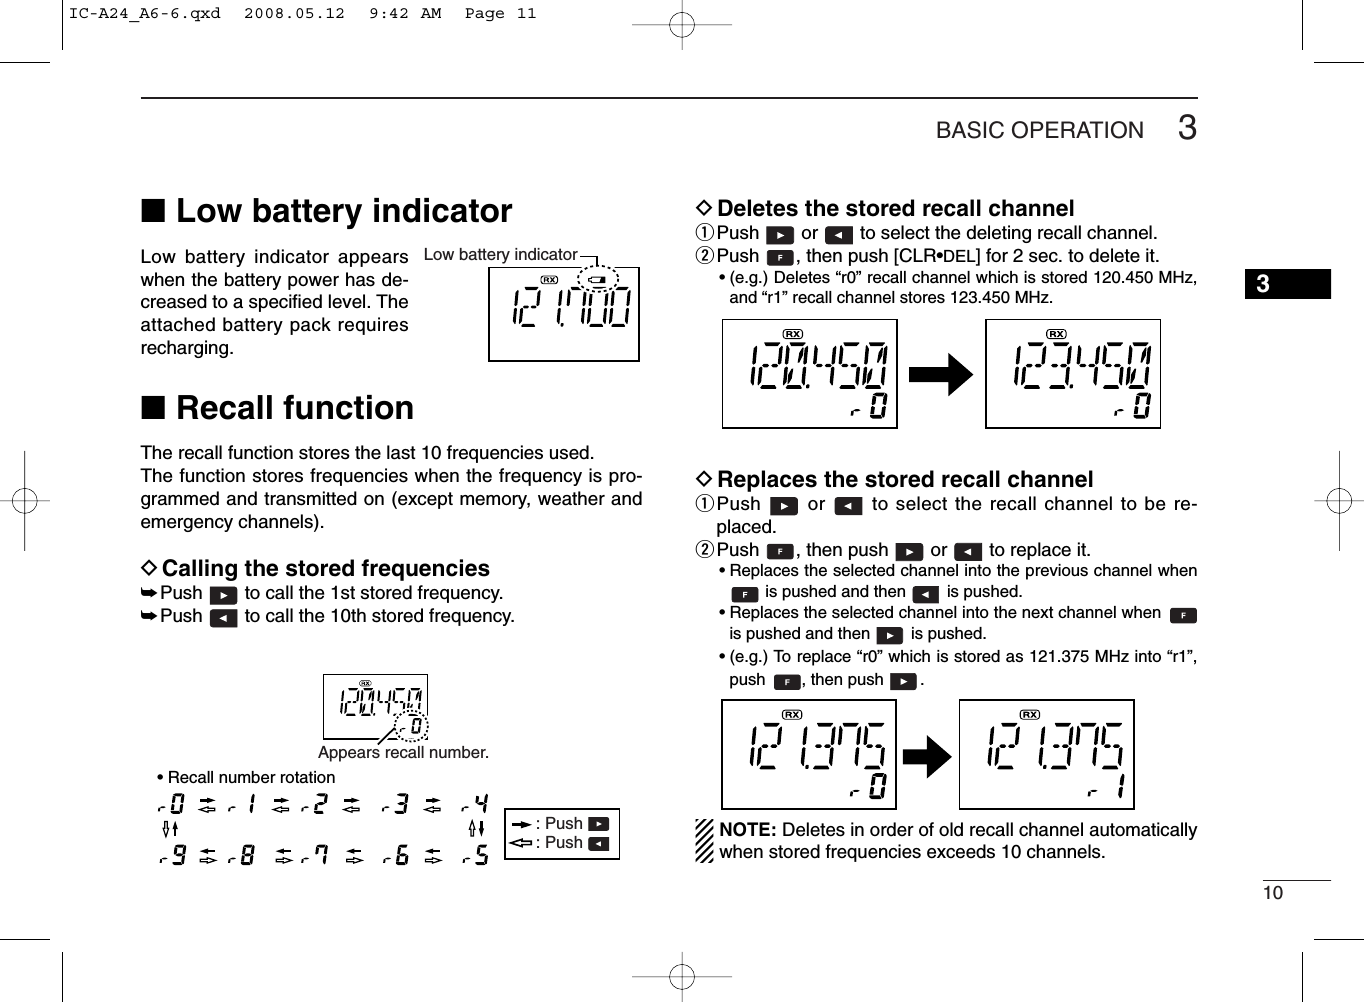 103BASIC OPERATION■Low battery indicatorLow battery indicator appearswhen the battery power has de-creased to a speciﬁed level. Theattached battery pack requiresrecharging.■Recall functionThe recall function stores the last 10 frequencies used.The function stores frequencies when the frequency is pro-grammed and transmitted on (except memory, weather andemergency channels).DCalling the stored frequencies➥Push  to call the 1st stored frequency.➥Push  to call the 10th stored frequency.DDeletes the stored recall channelqPush  or  to select the deleting recall channel.wPush  , then push [CLR•DEL] for 2 sec. to delete it.• (e.g.) Deletes “r0” recall channel which is stored 120.450 MHz,and “r1” recall channel stores 123.450 MHz.DReplaces the stored recall channelqPush  or  to select the recall channel to be re-placed.wPush  , then push  or  to replace it.• Replaces the selected channel into the previous channel whenis pushed and then  is pushed.• Replaces the selected channel into the next channel when is pushed and then  is pushed.• (e.g.) To replace “r0” which is stored as 121.375 MHz into “r1”,push  , then push  .NOTE: Deletes in order of old recallchannel automaticallywhen stored frequencies exceeds 10 channels.Low battery indicatorAppears recall number.: Push : Push • Recall number rotation3IC-A24_A6-6.qxd  2008.05.12  9:42 AM  Page 11